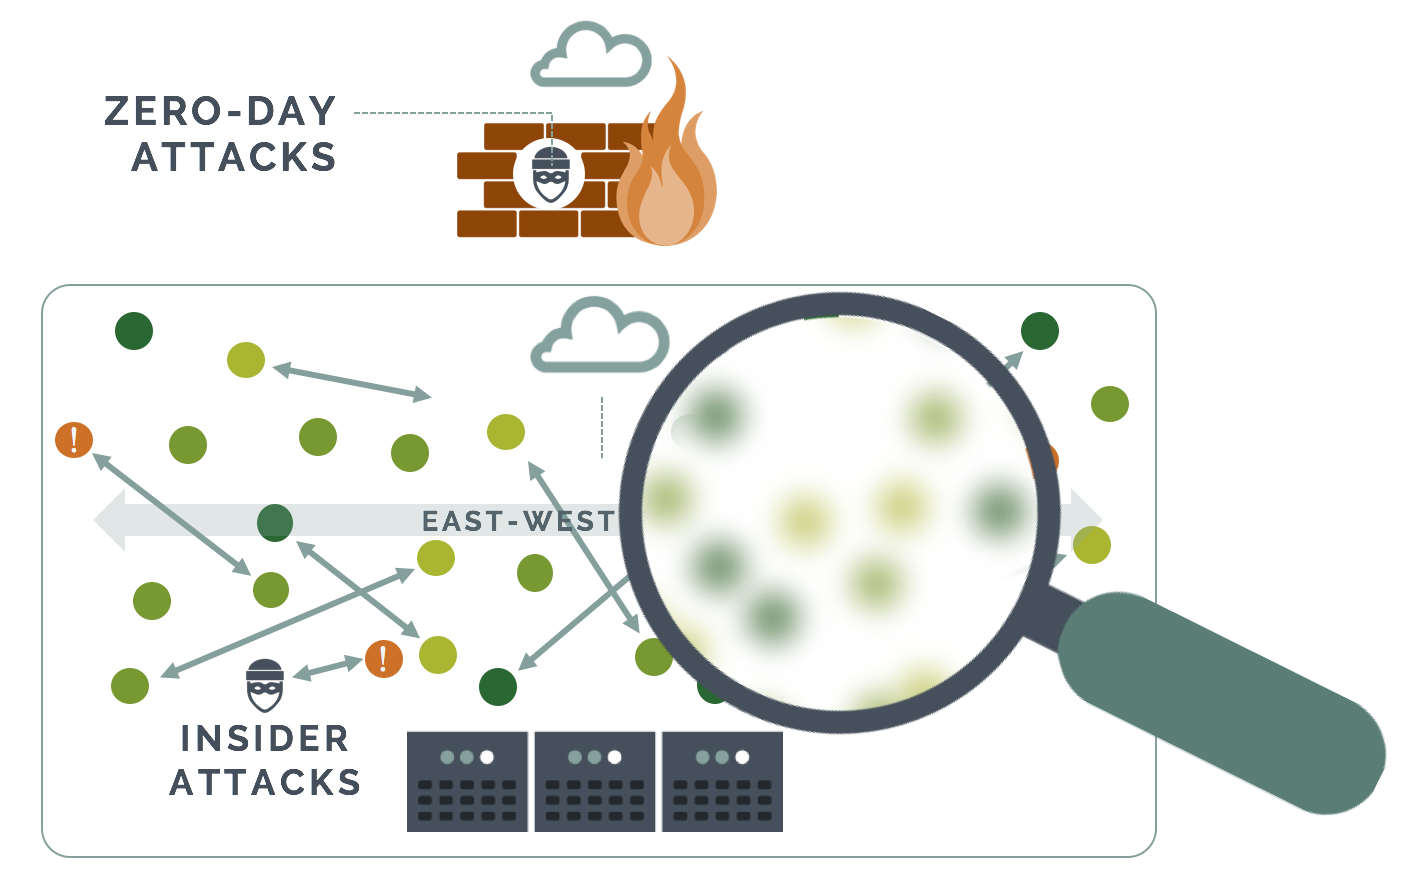 Traditional firewalls are bllind